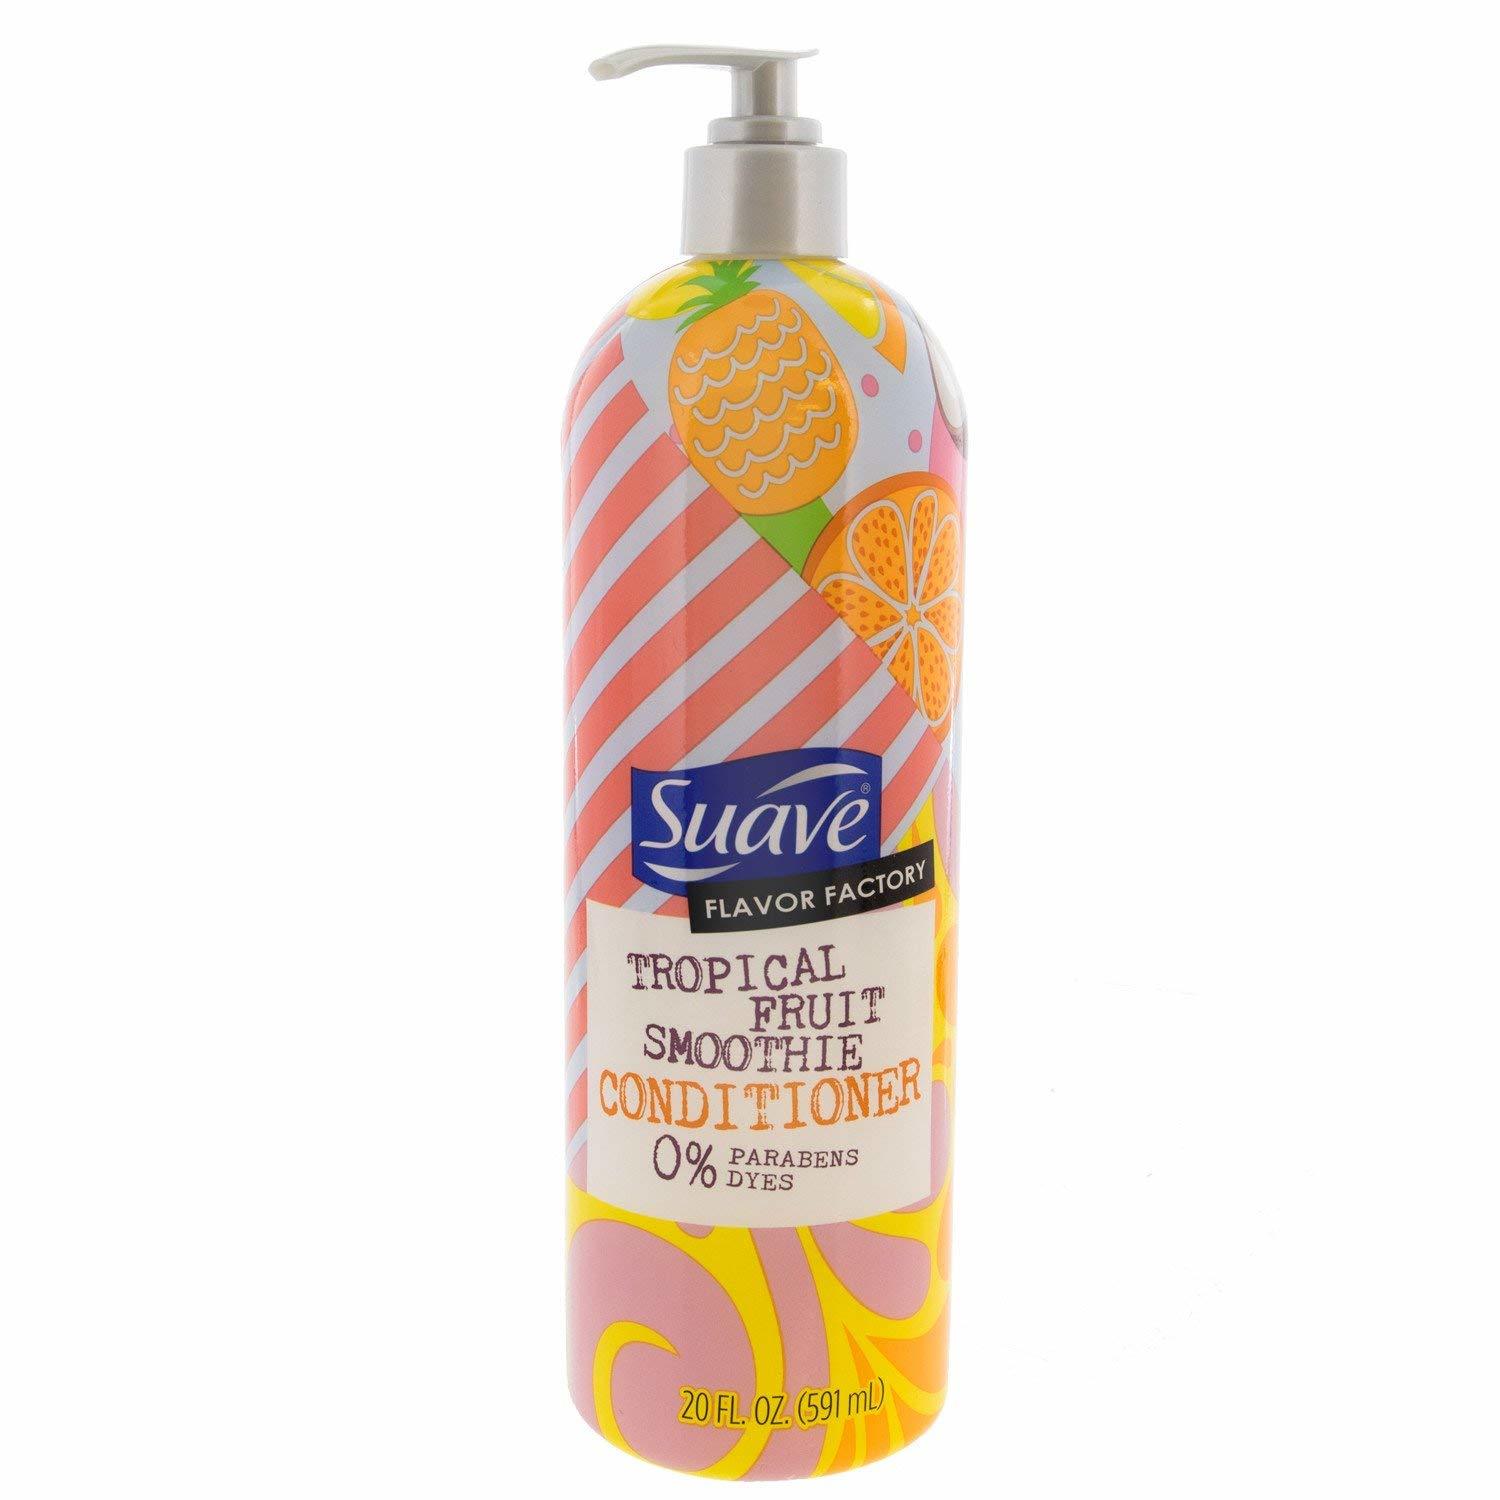 New SUAVE HAIR Flavor Factory Tropical Fruit Smoothie Conditioner 20 oz